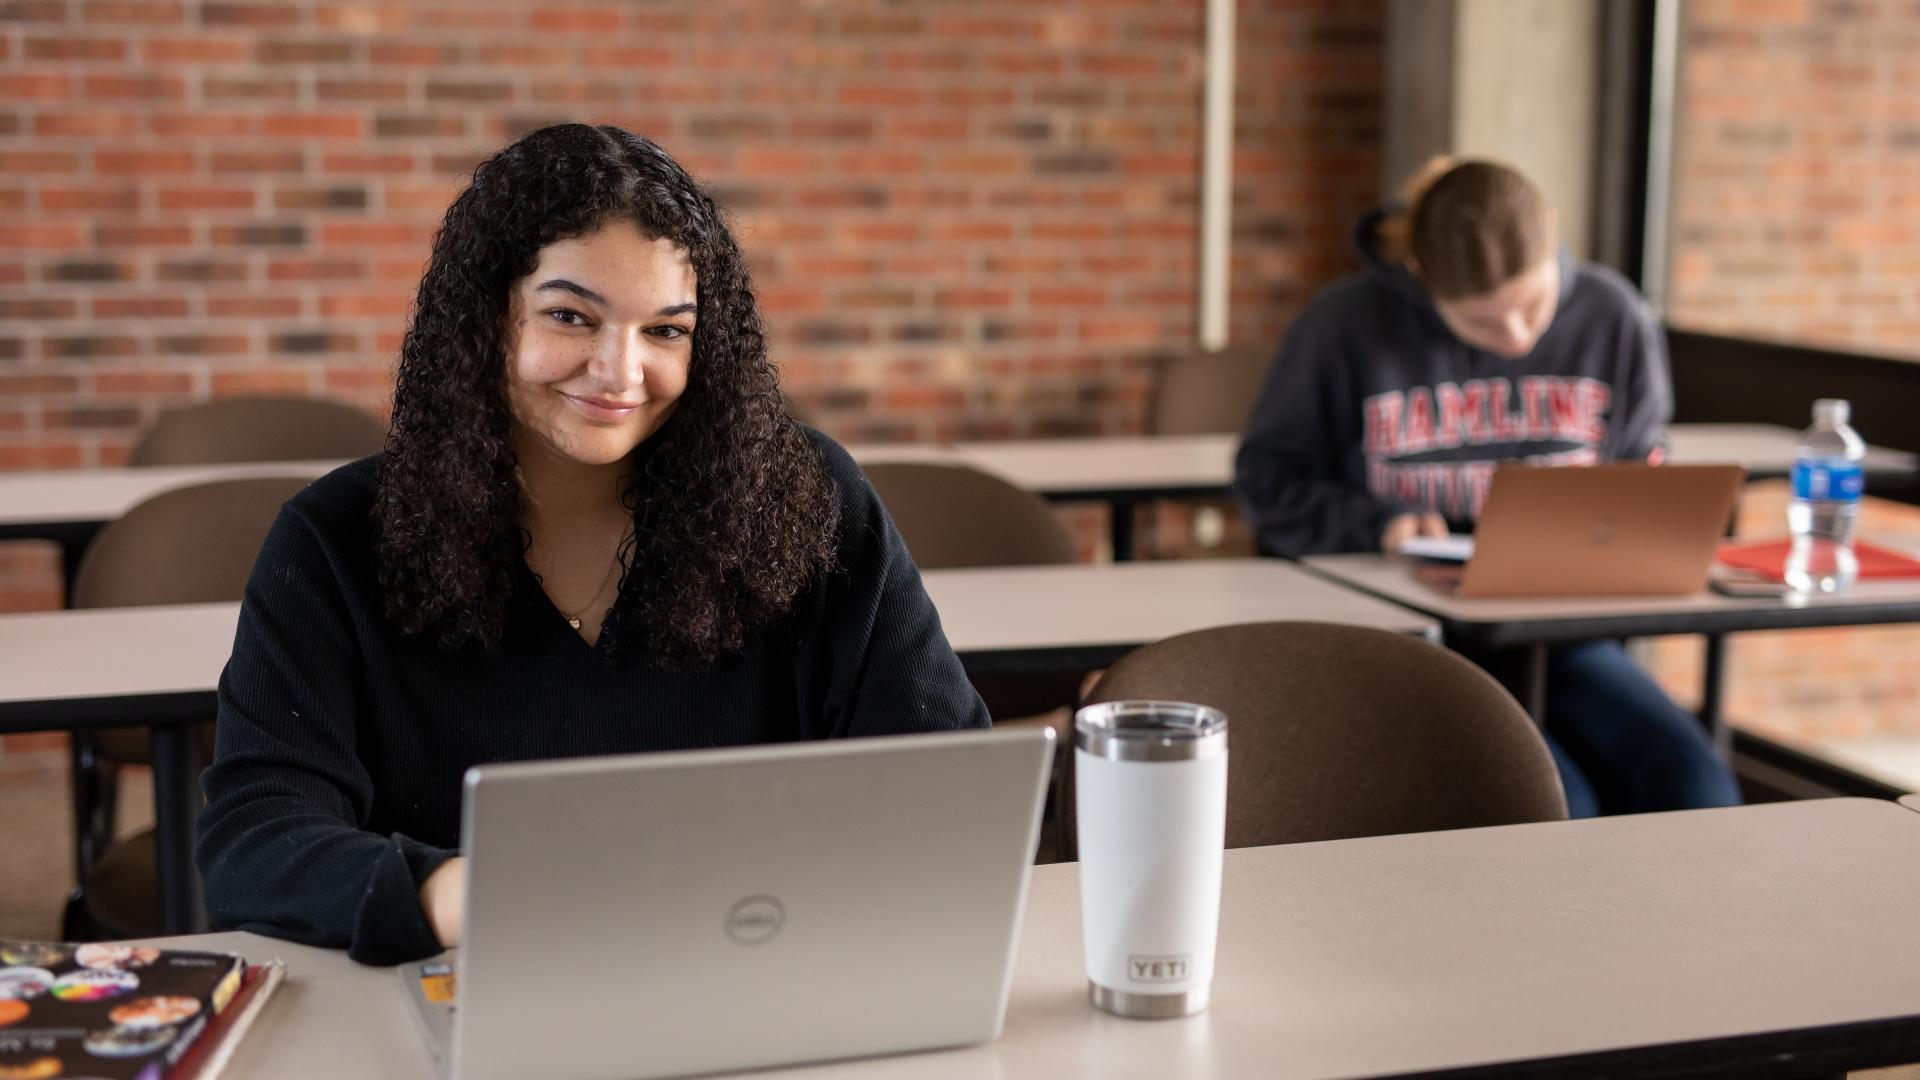 Student smiling using a laptop